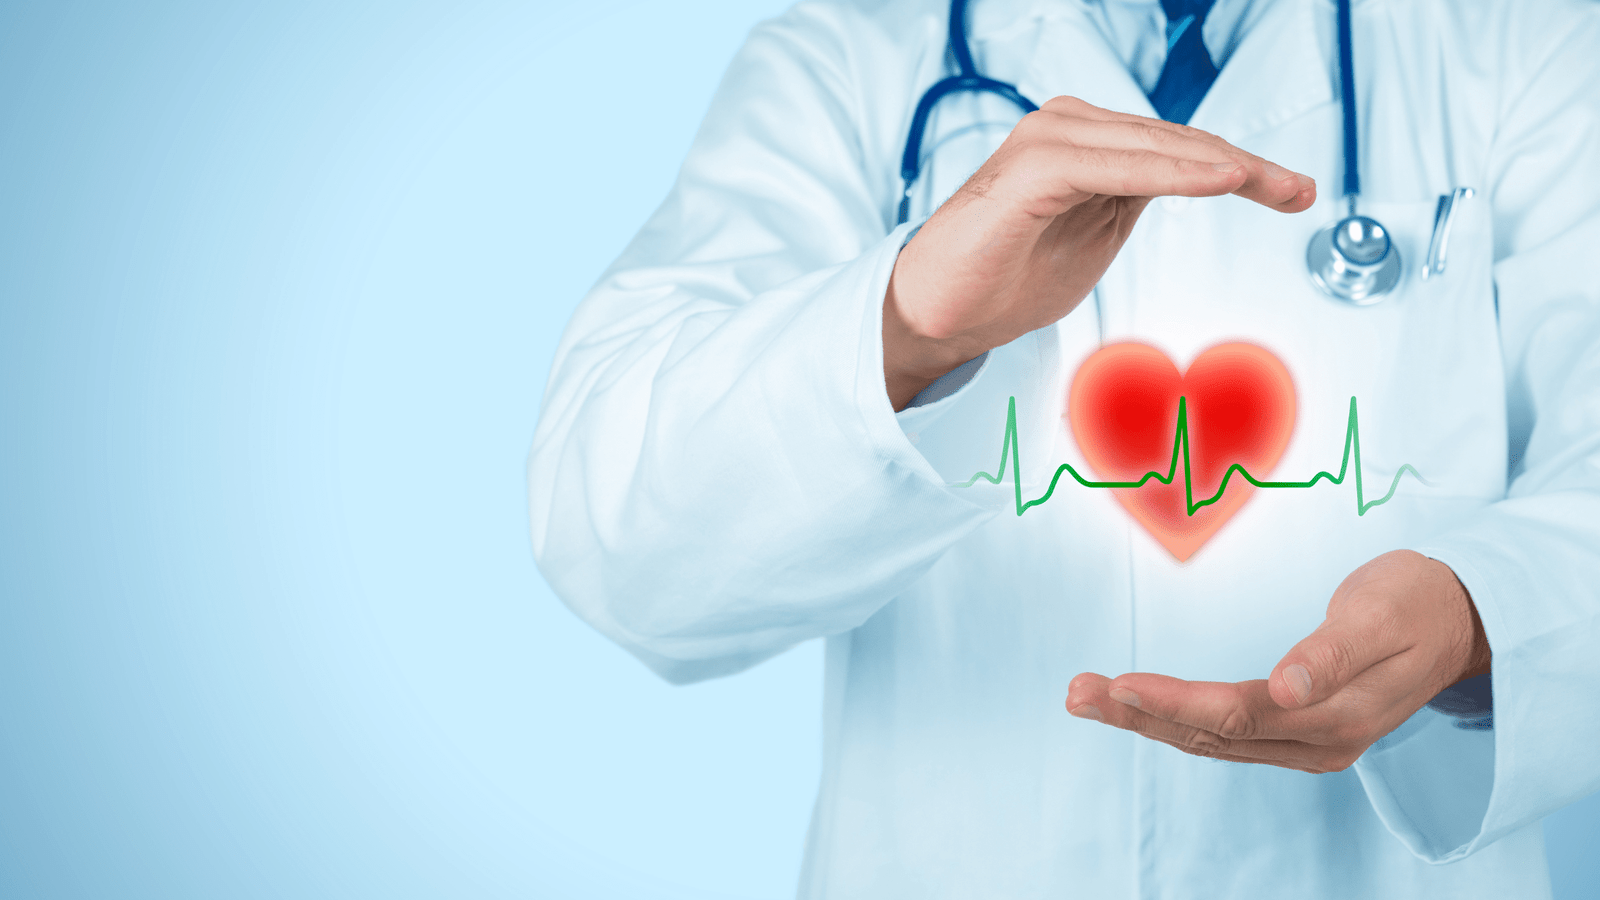 Heart Health : 7 Ways to Improve Heart Health and Reduce Risk of Heart Disease